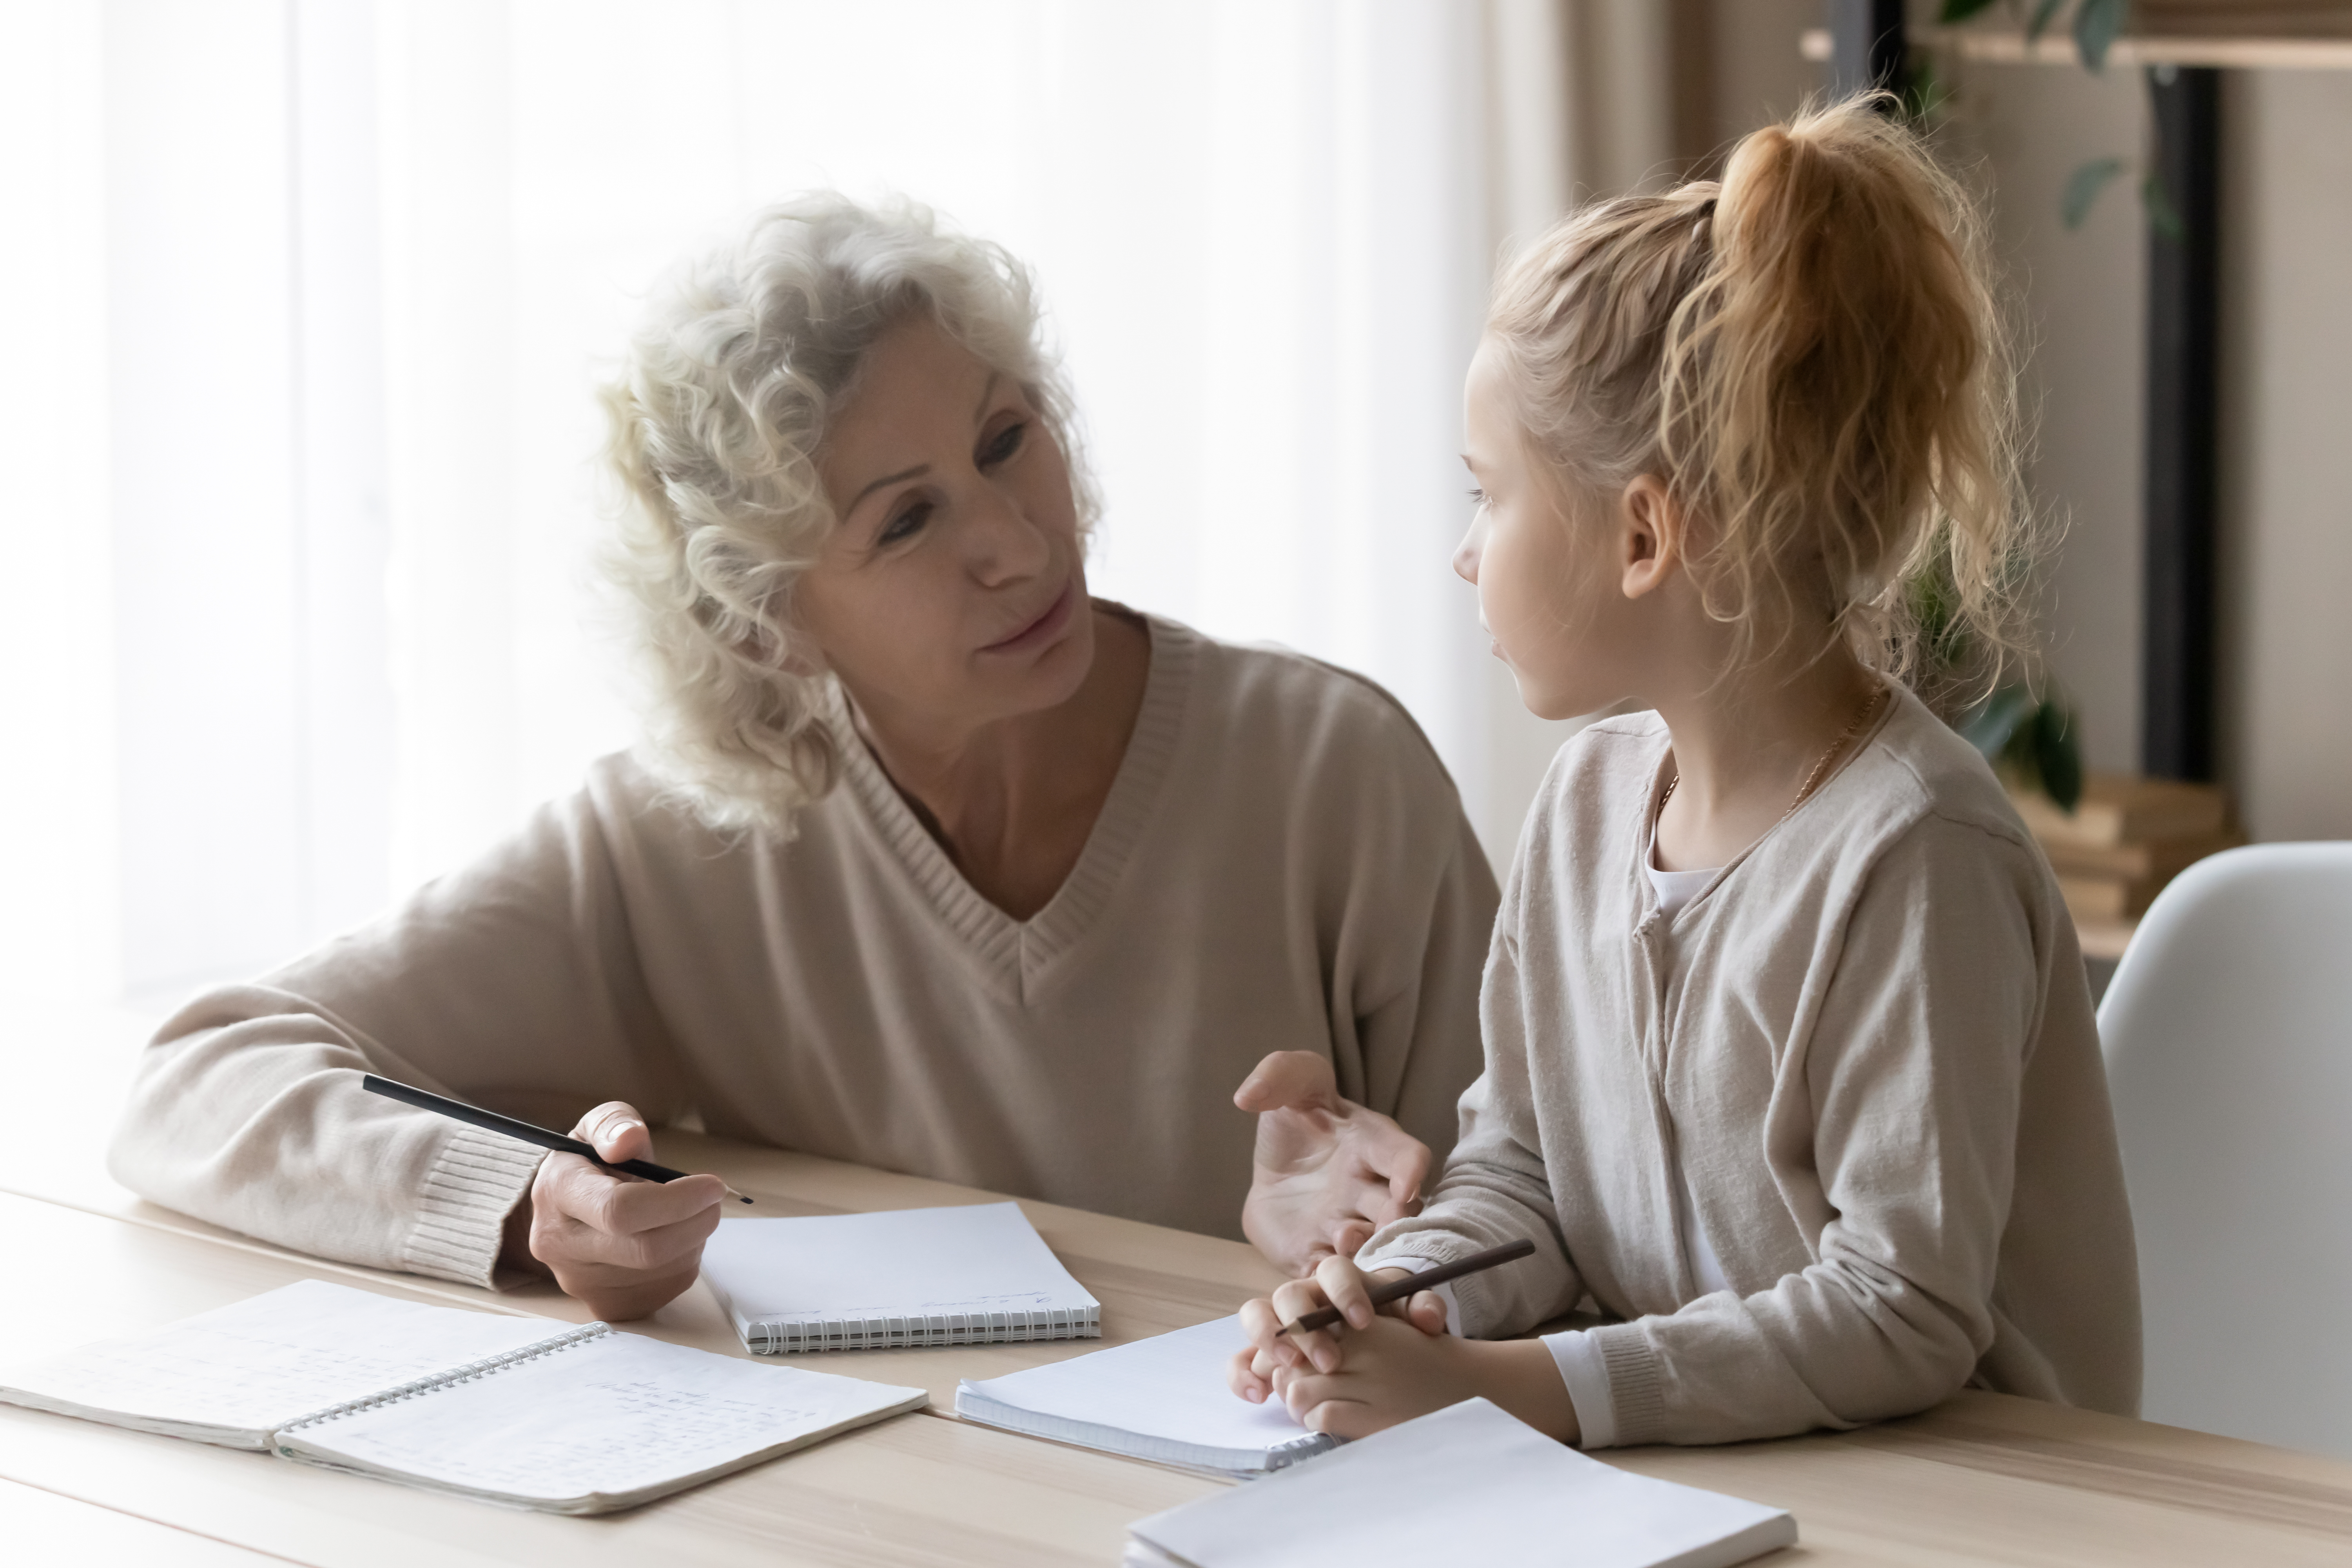 Older woman talking to a young girl | Source: Shutterstock